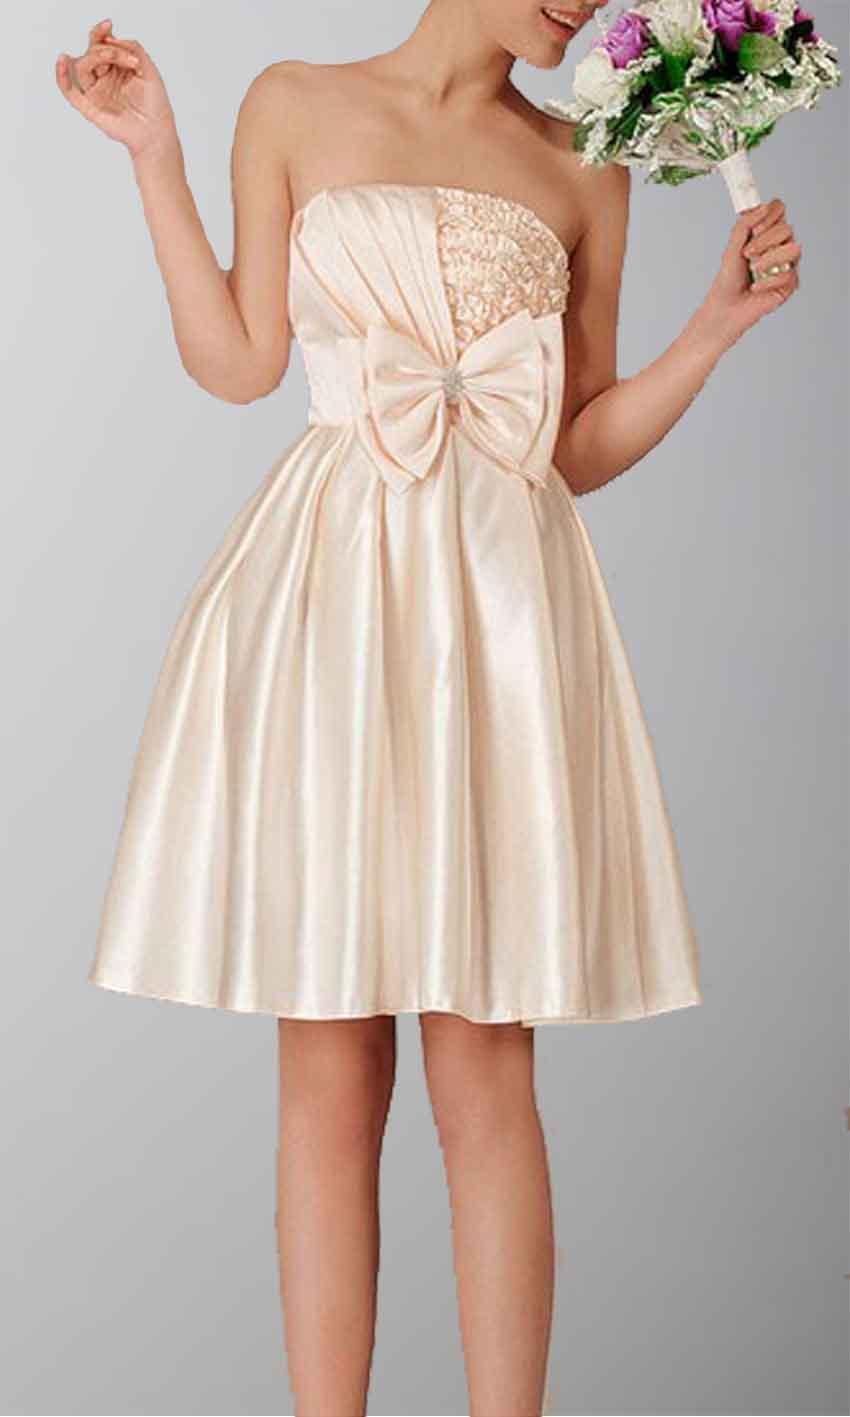 Hochzeit - Unique Designed Bowknot Umbellate Dress For Family Party KSP024 [KSP024] - £88.00 : Cheap Prom Dresses Uk, Bridesmaid Dresses, 2014 Prom & Evening Dresses, Look for cheap elegant prom dresses 2014, cocktail gowns, or dresses for special occasions? kisspro